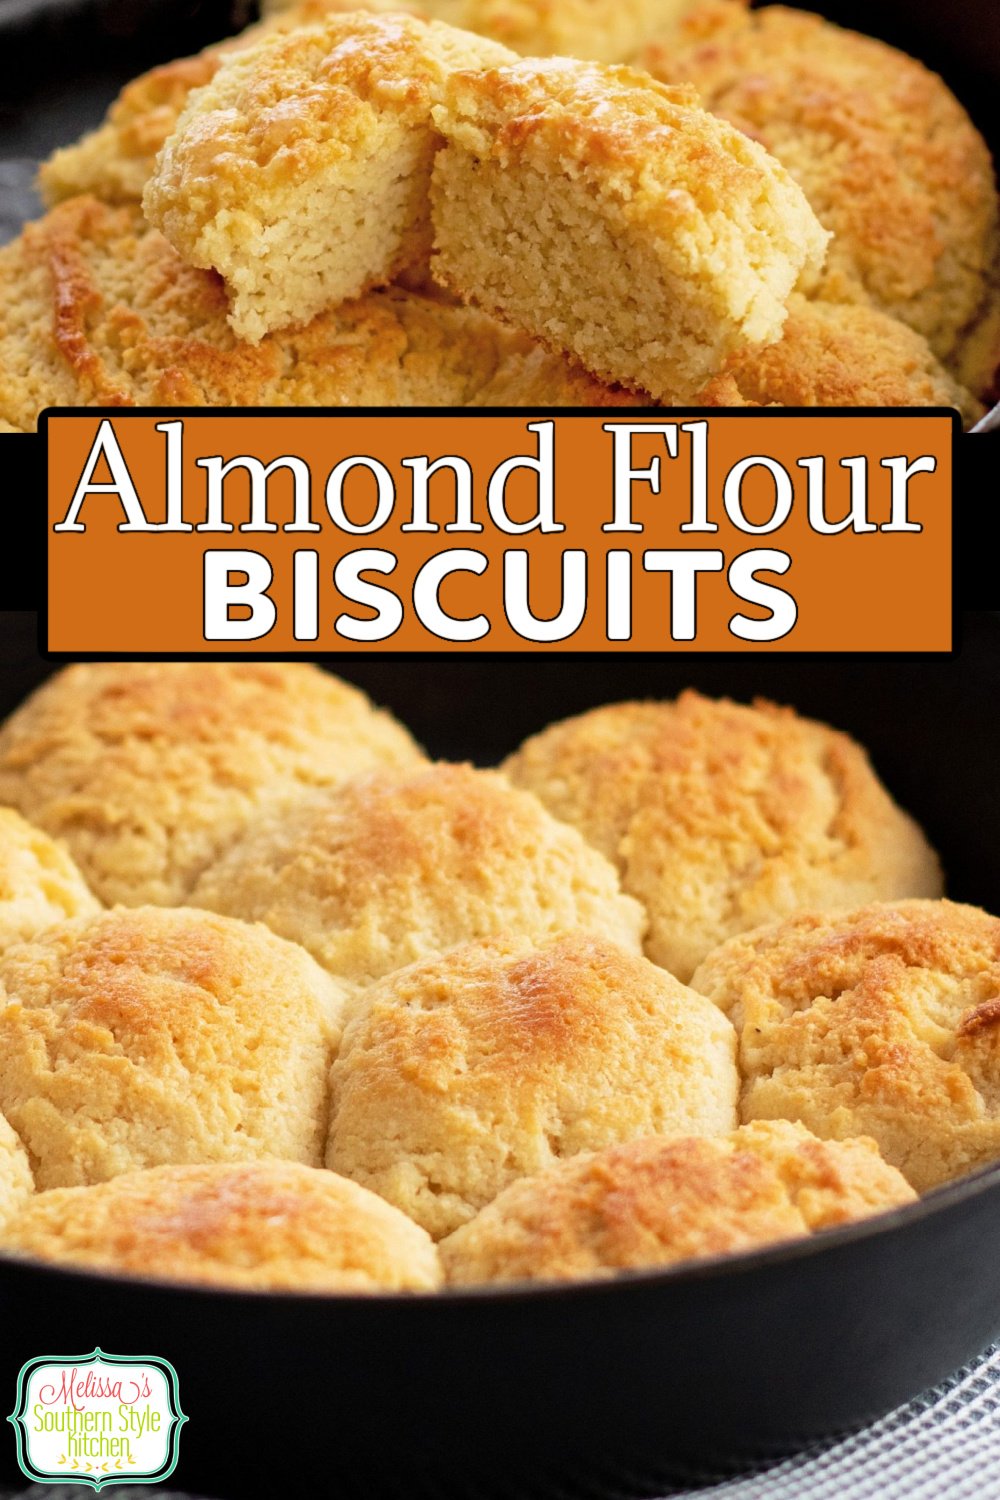 These buttery Almond Flour Biscuits can be enjoyed at any meal with butter and jam, stuffed with ham and eggs or for breakfast and brunch #almondflourbiscuits #biscuits #southernbuttermilkbiscuits #bestbiscuitrecipes #southernrecipes #homemadebiscuits #breadrecipes #glutenfreebiscuits #ketobiscuits #glutenfreerecipes via @melissasssk